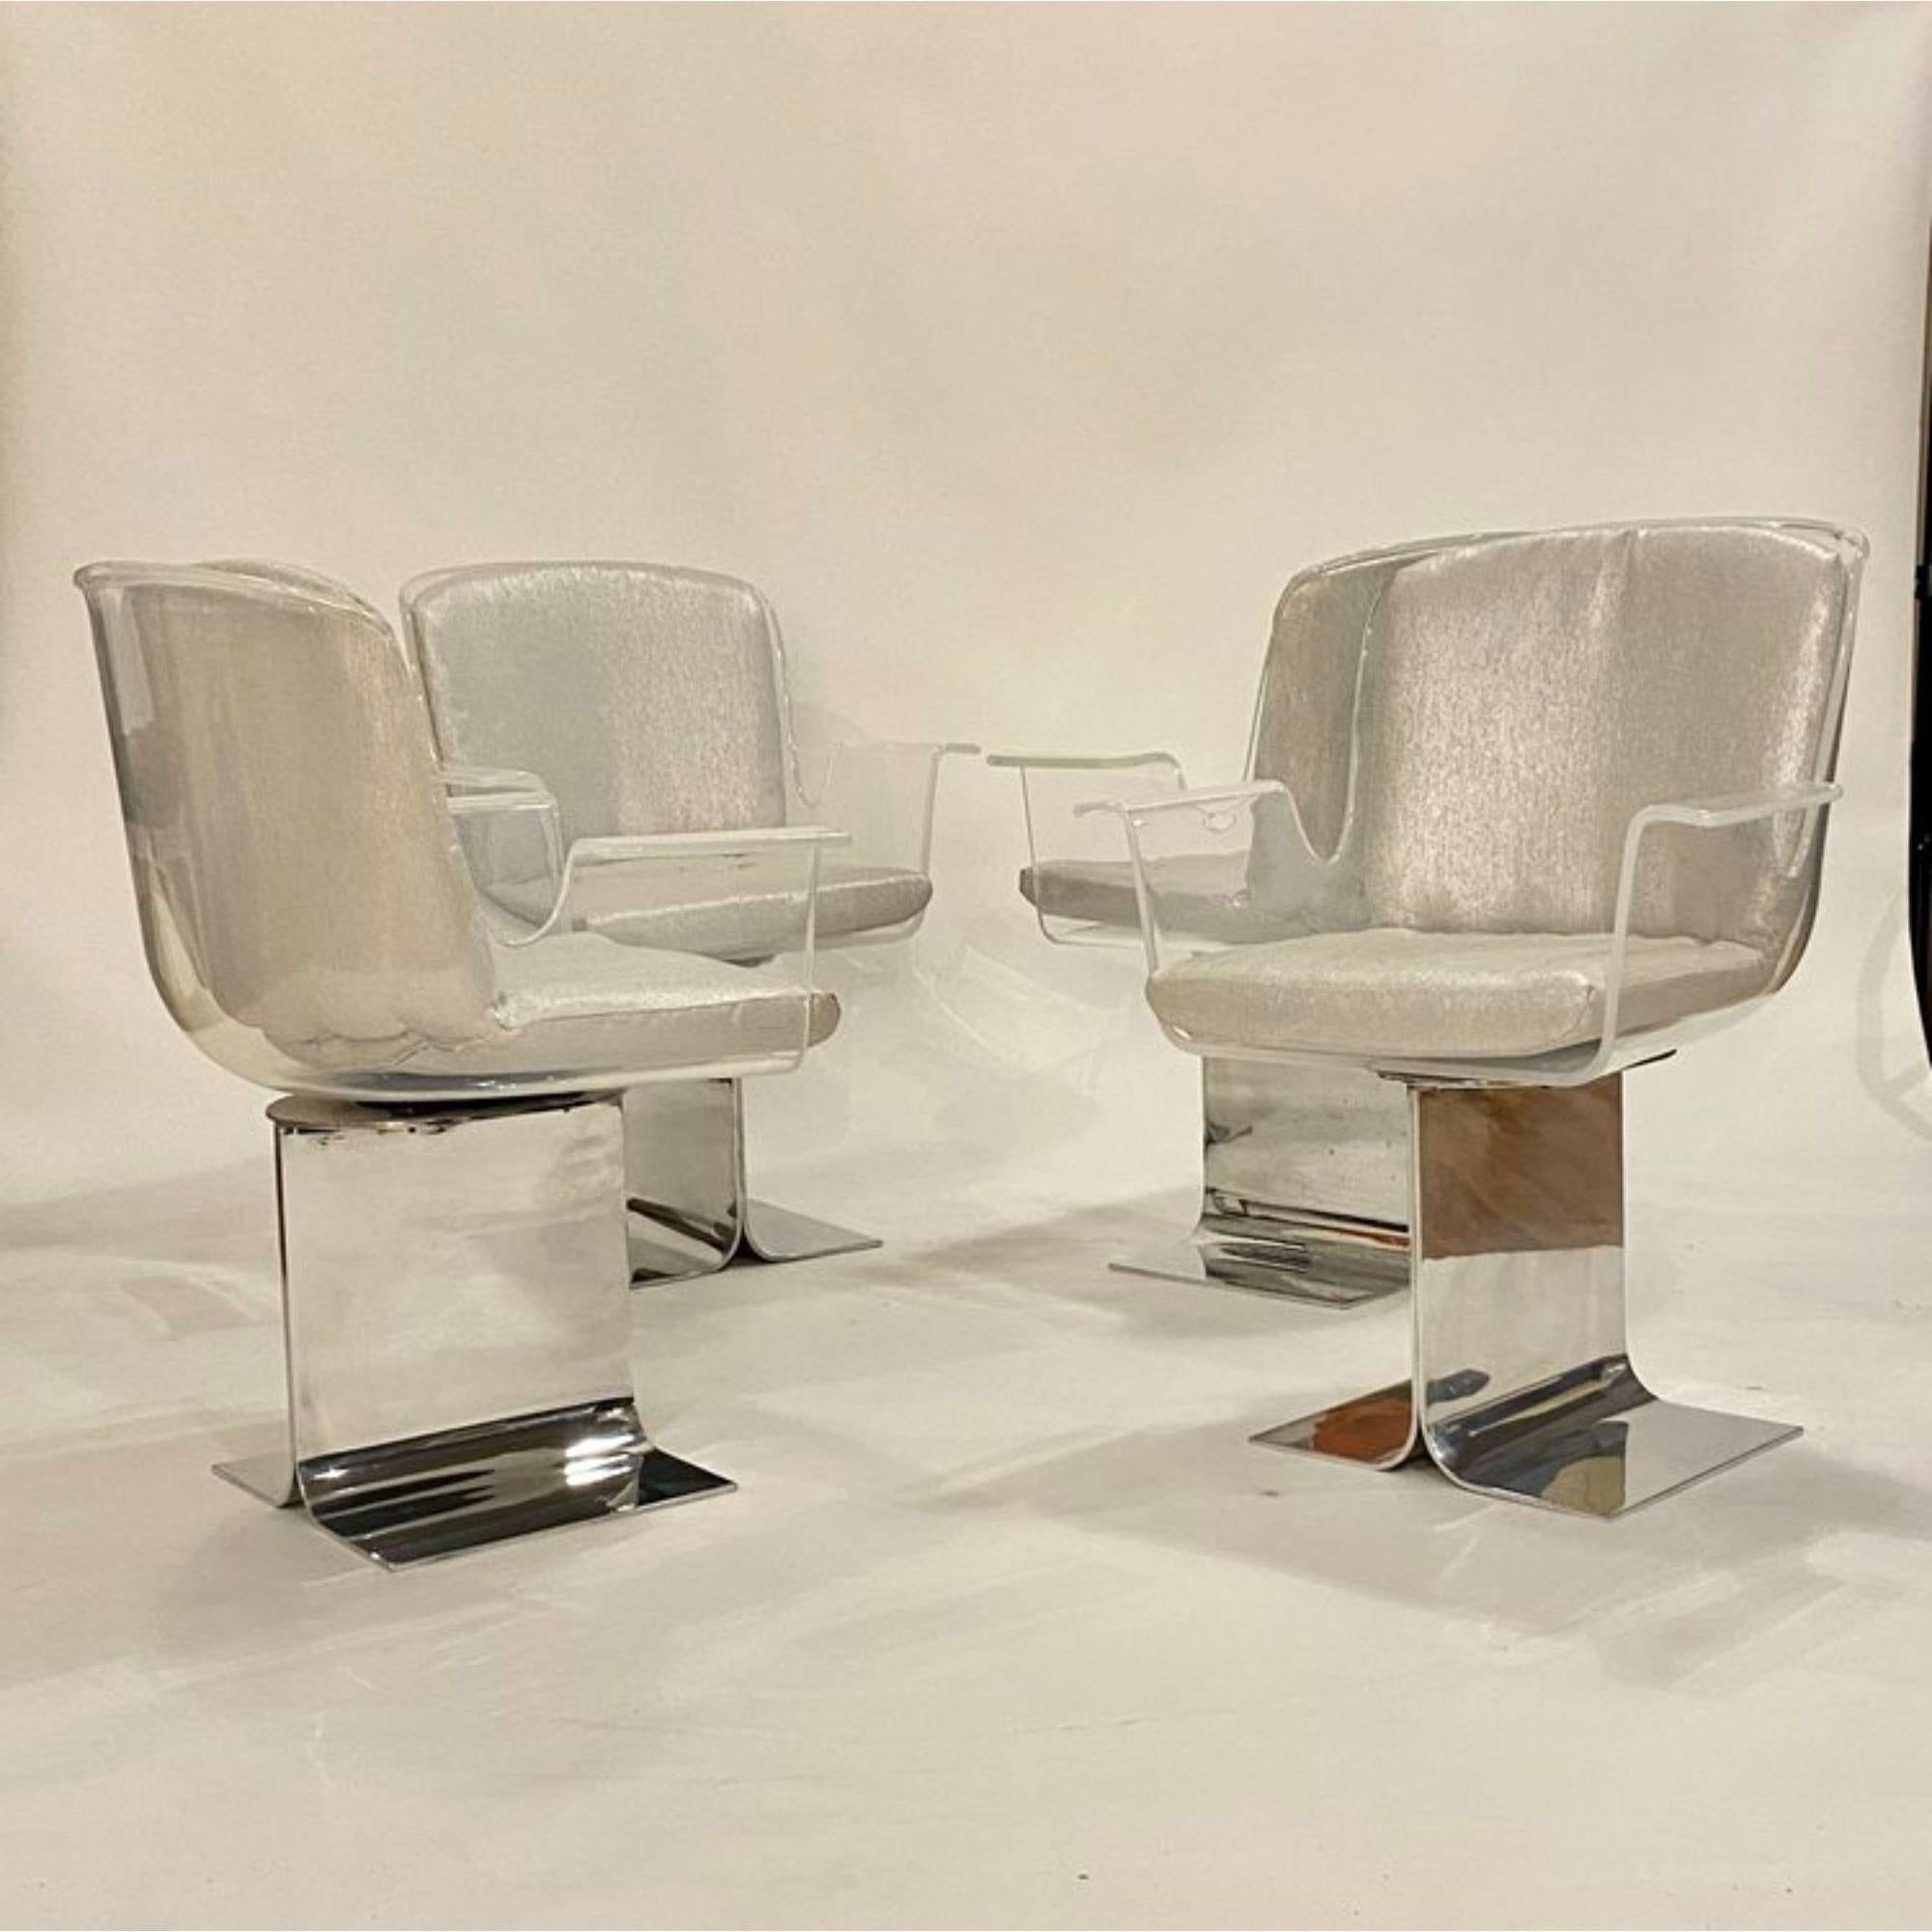 Set of four Pace collection Lucite swivel arm chairs on polished chrome I-beam bases, designed by Leon Rosen. Newly upholstered cushions in a textured platinum fabric.

Additional Information:
Materials: Lucite, Aluminum
Color: Transparent,